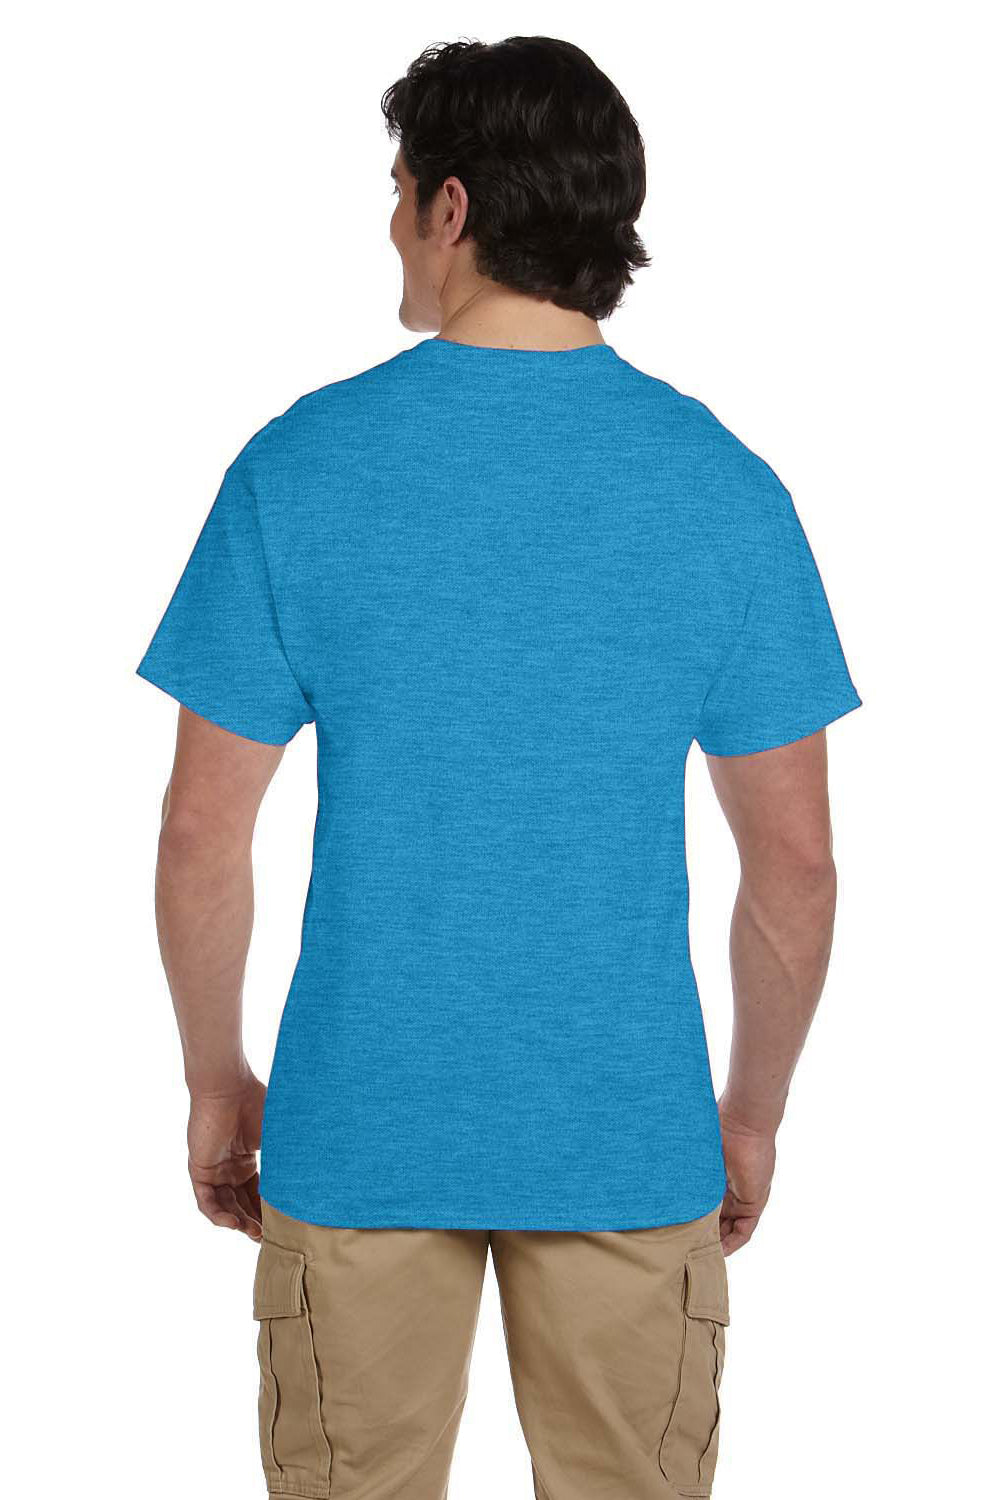 Fruit Of The Loom 3931 Mens HD Jersey Short Sleeve Crewneck T-Shirt Heather Turquoise Blue Back